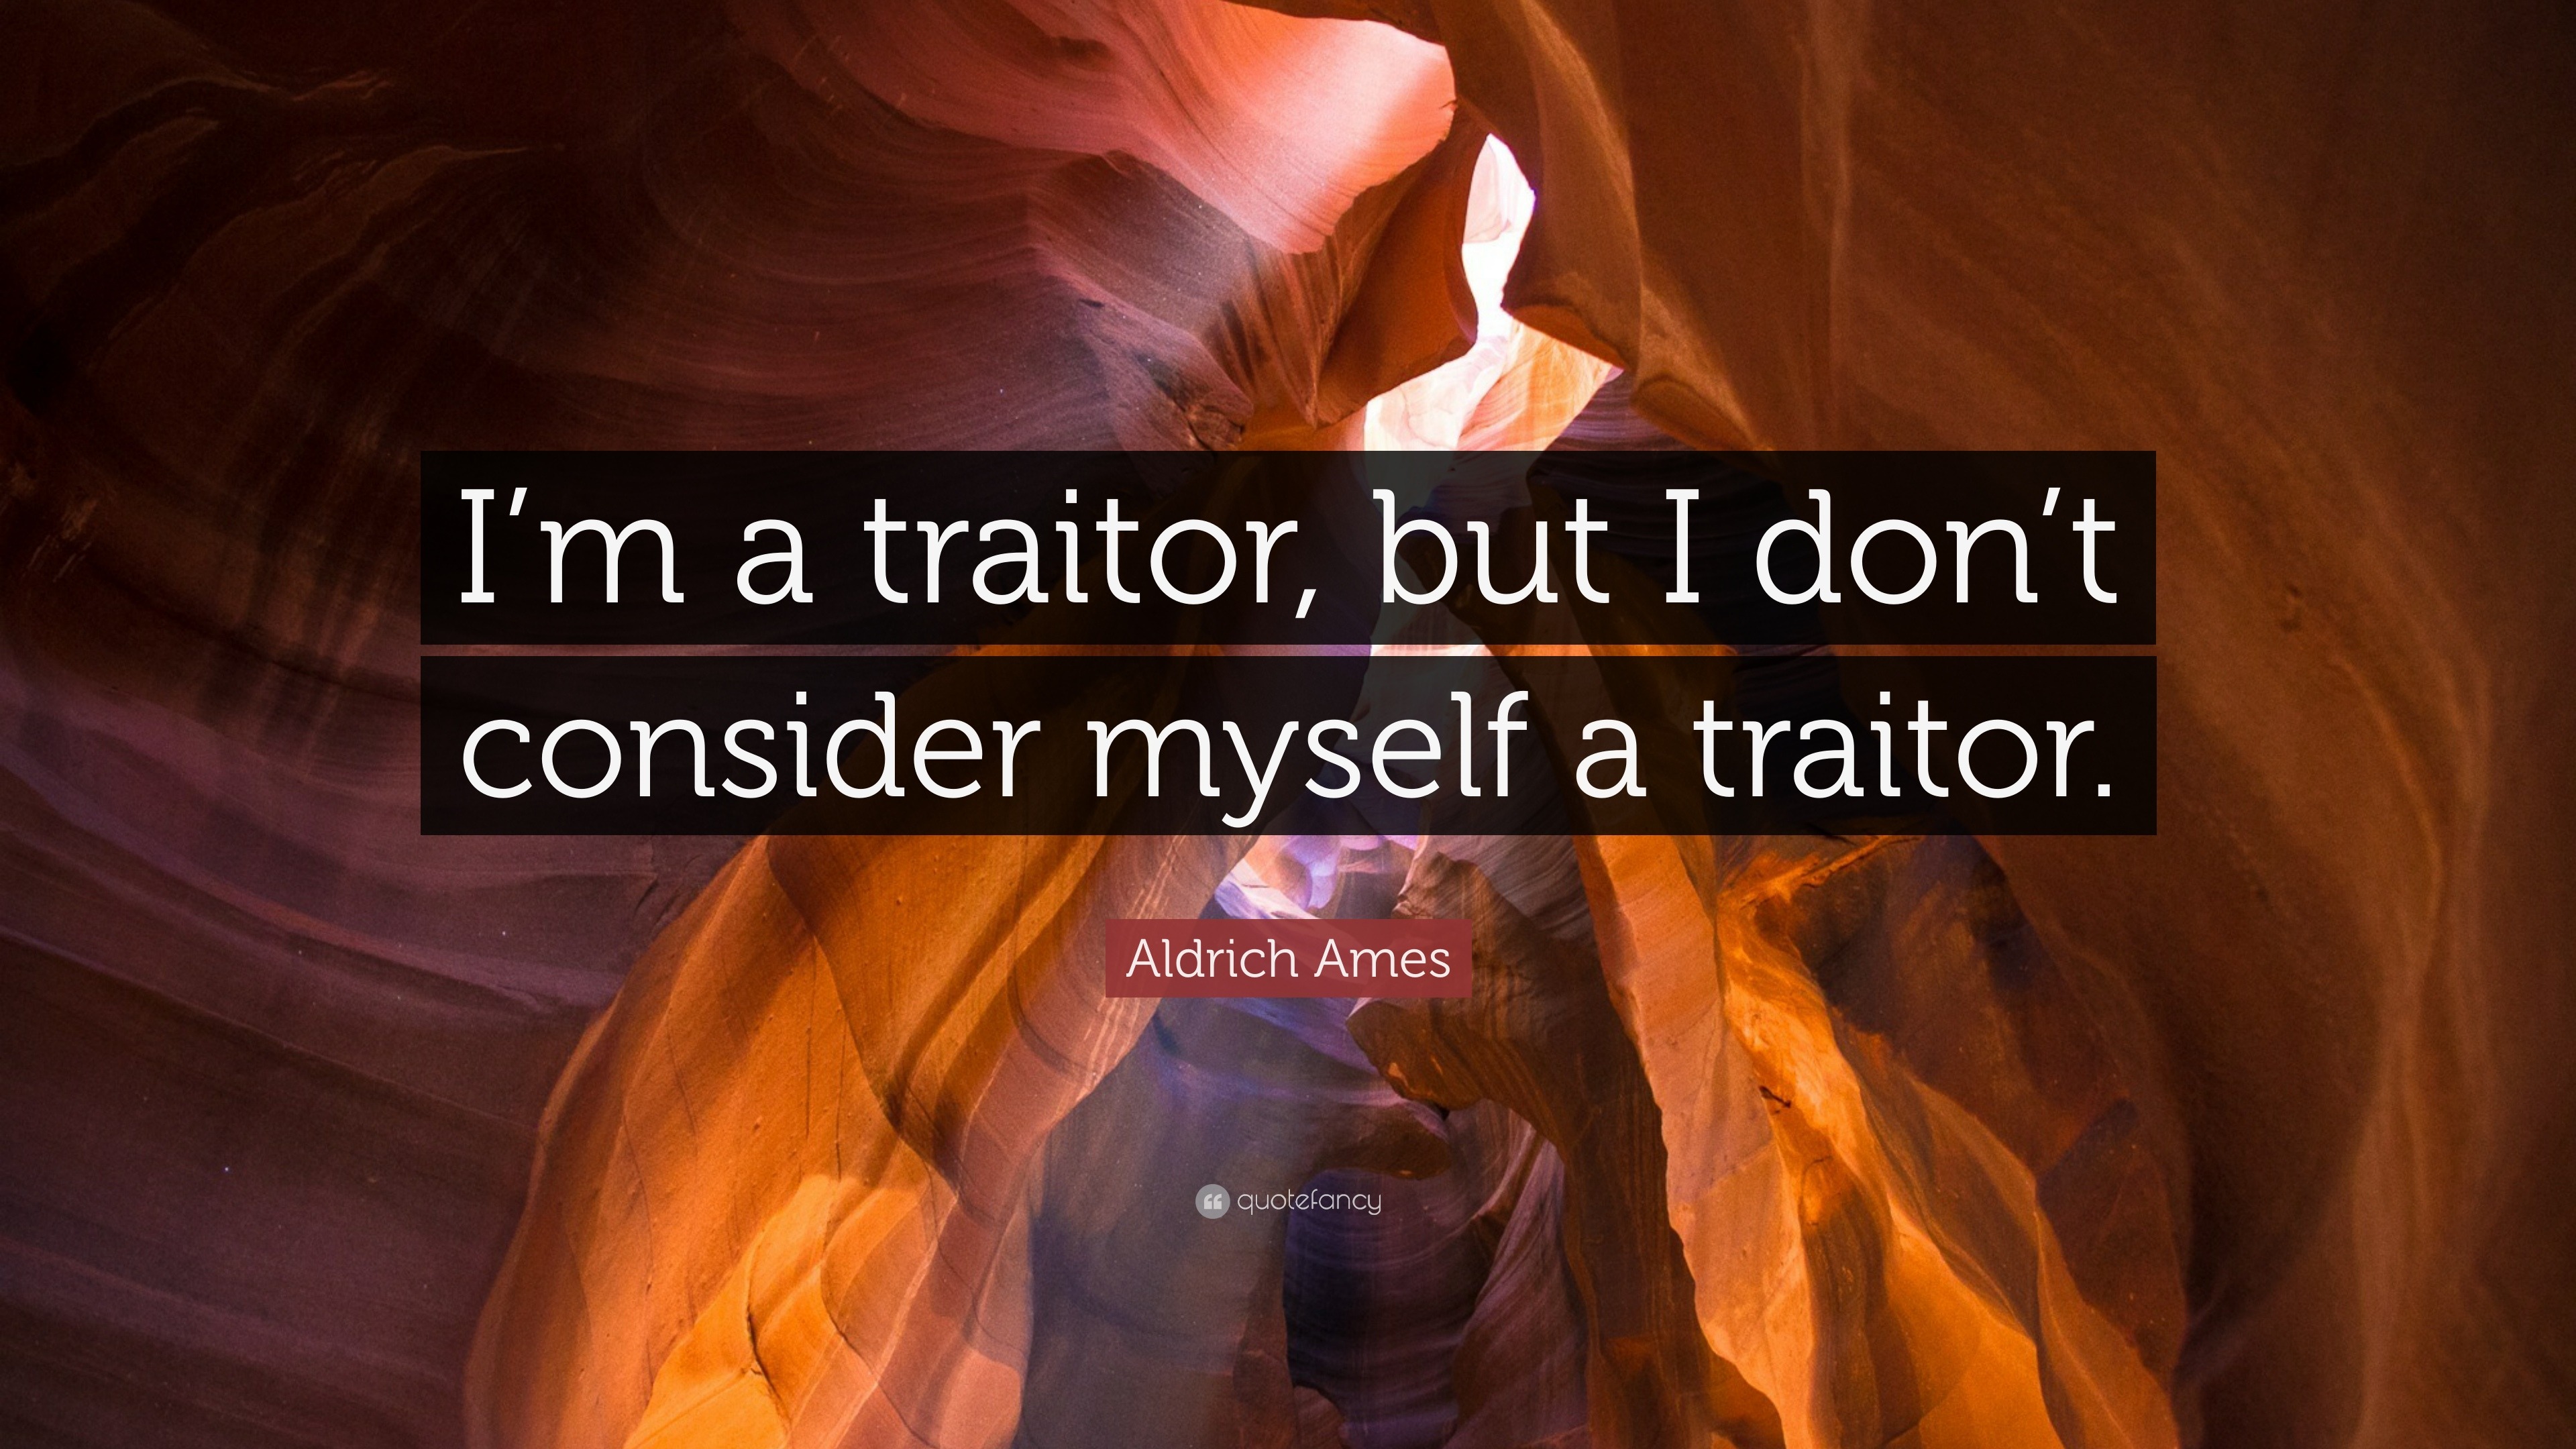 THE MEANING OF TRAITOR